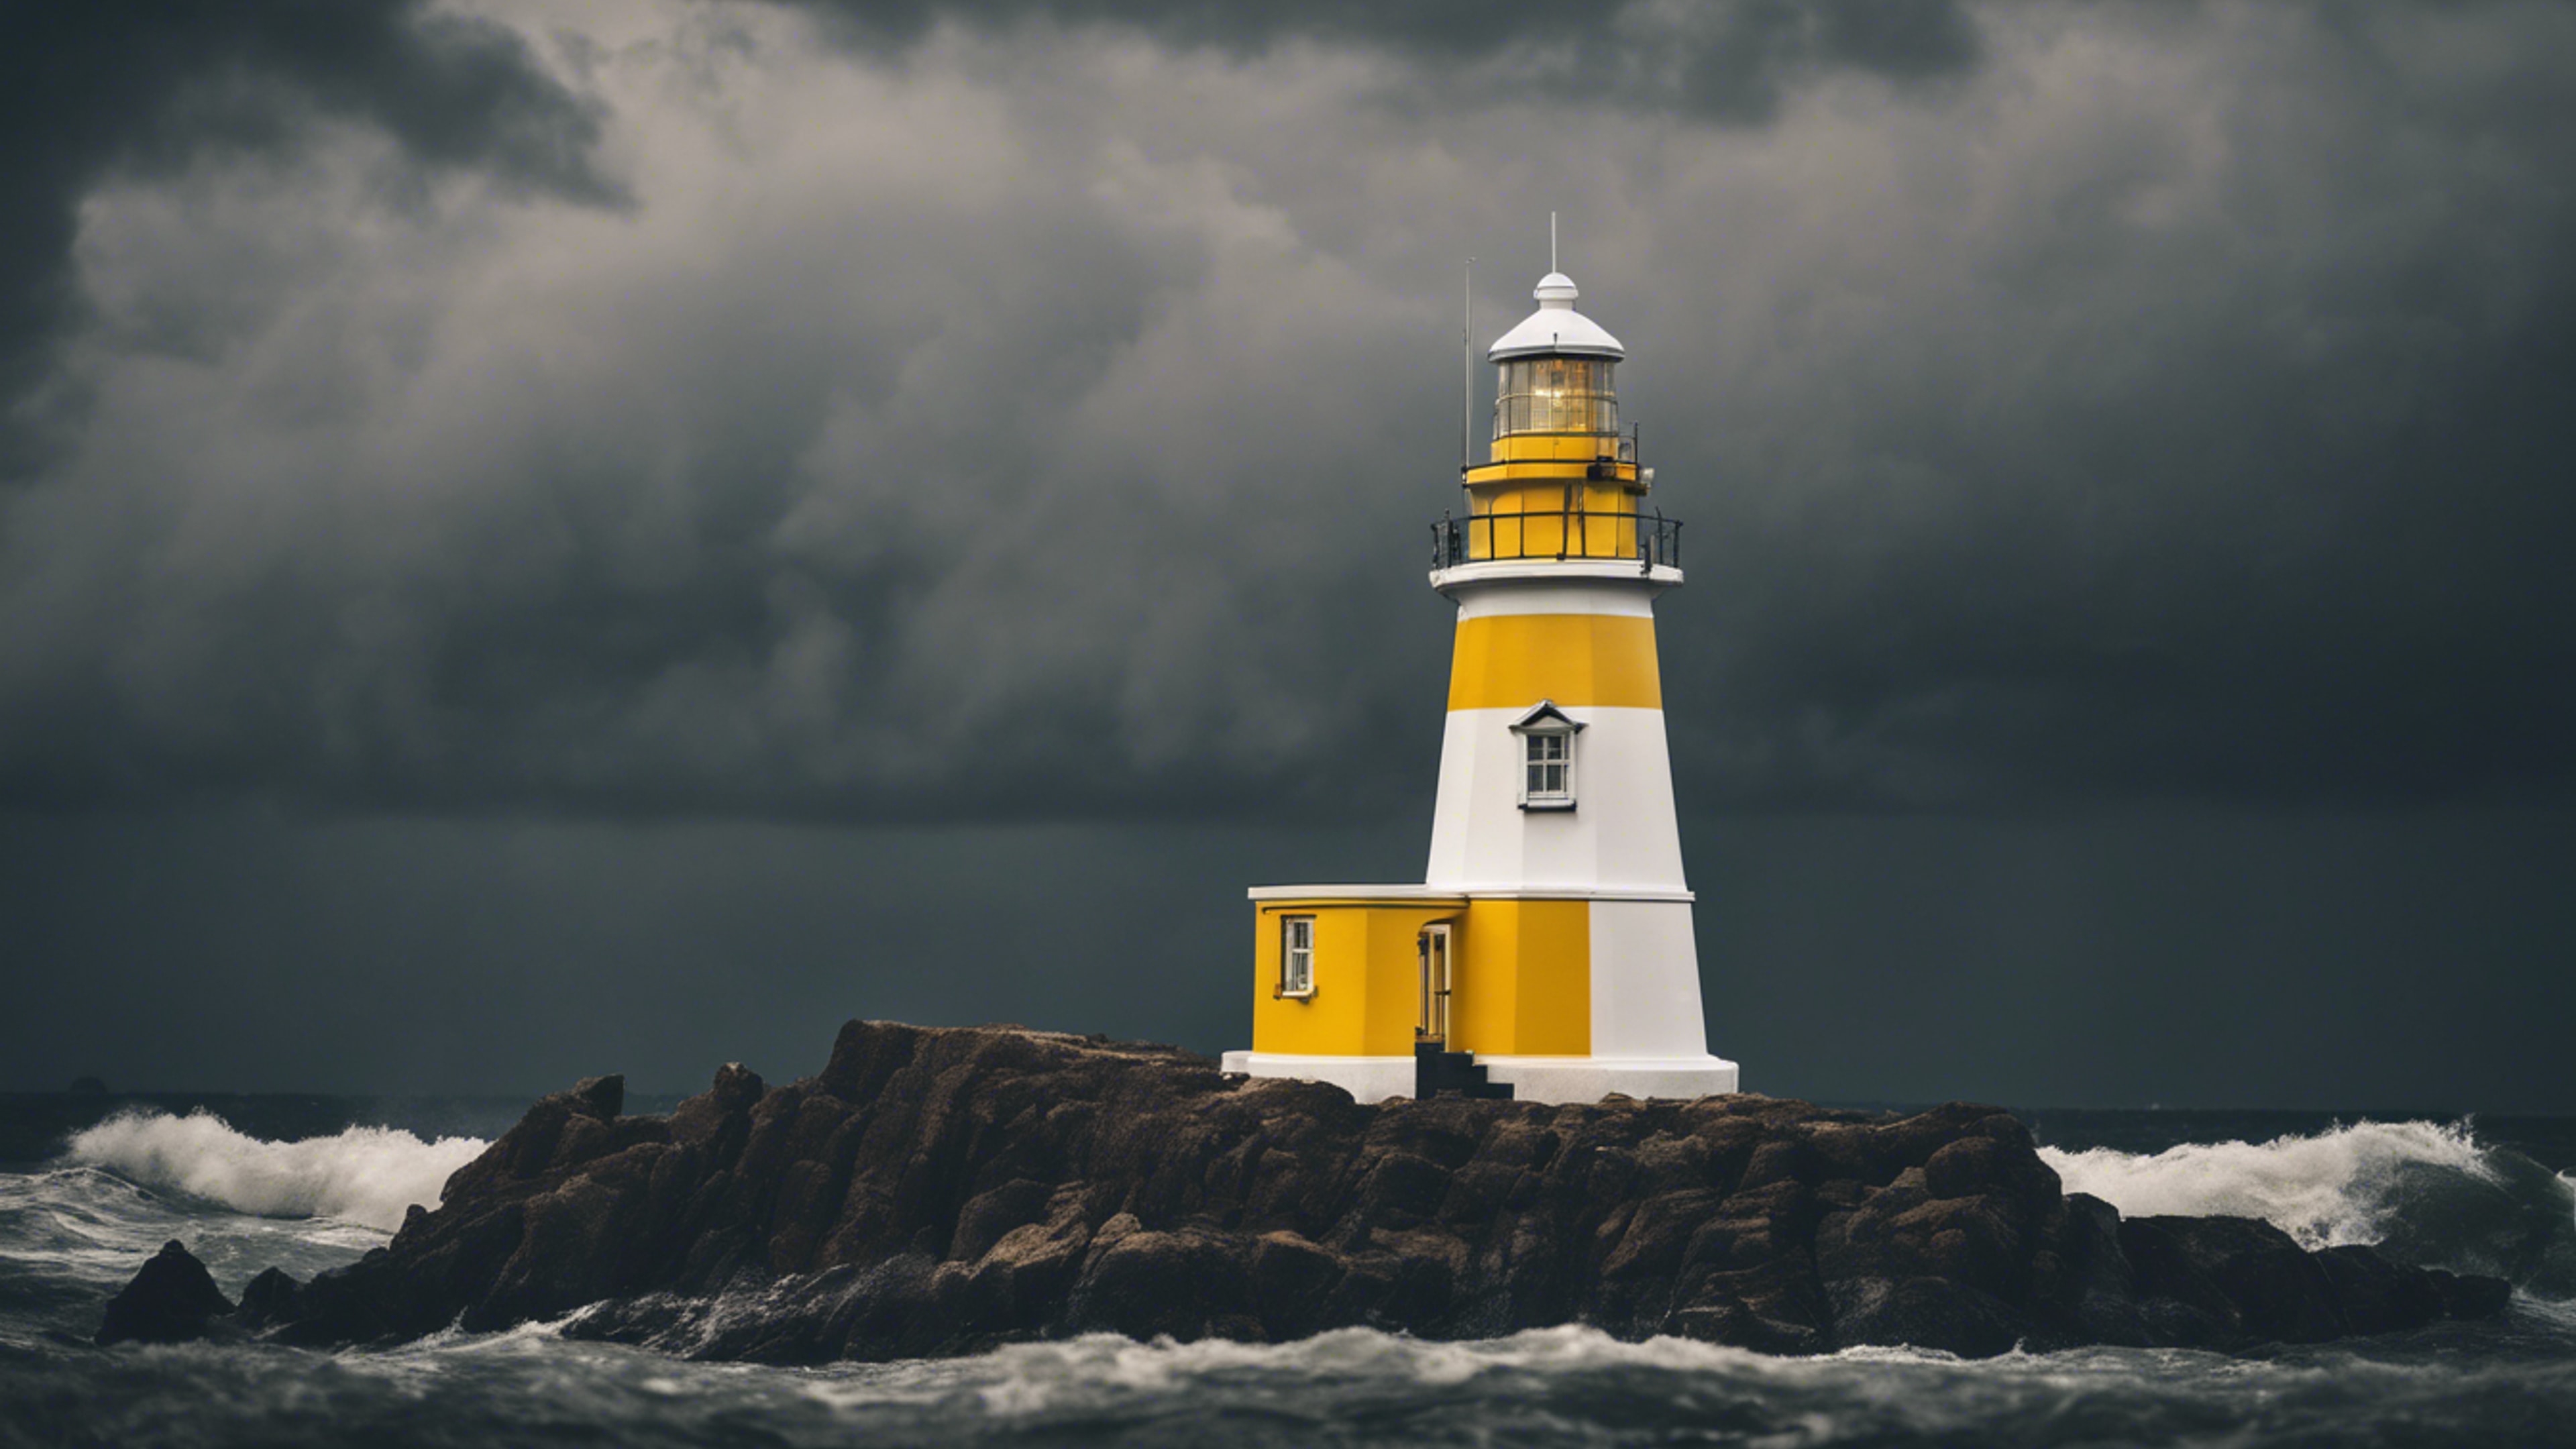 A white and yellow striped lighthouse standing tall against a stormy dark sky. Tapet[29fc73b96f634852baf9]